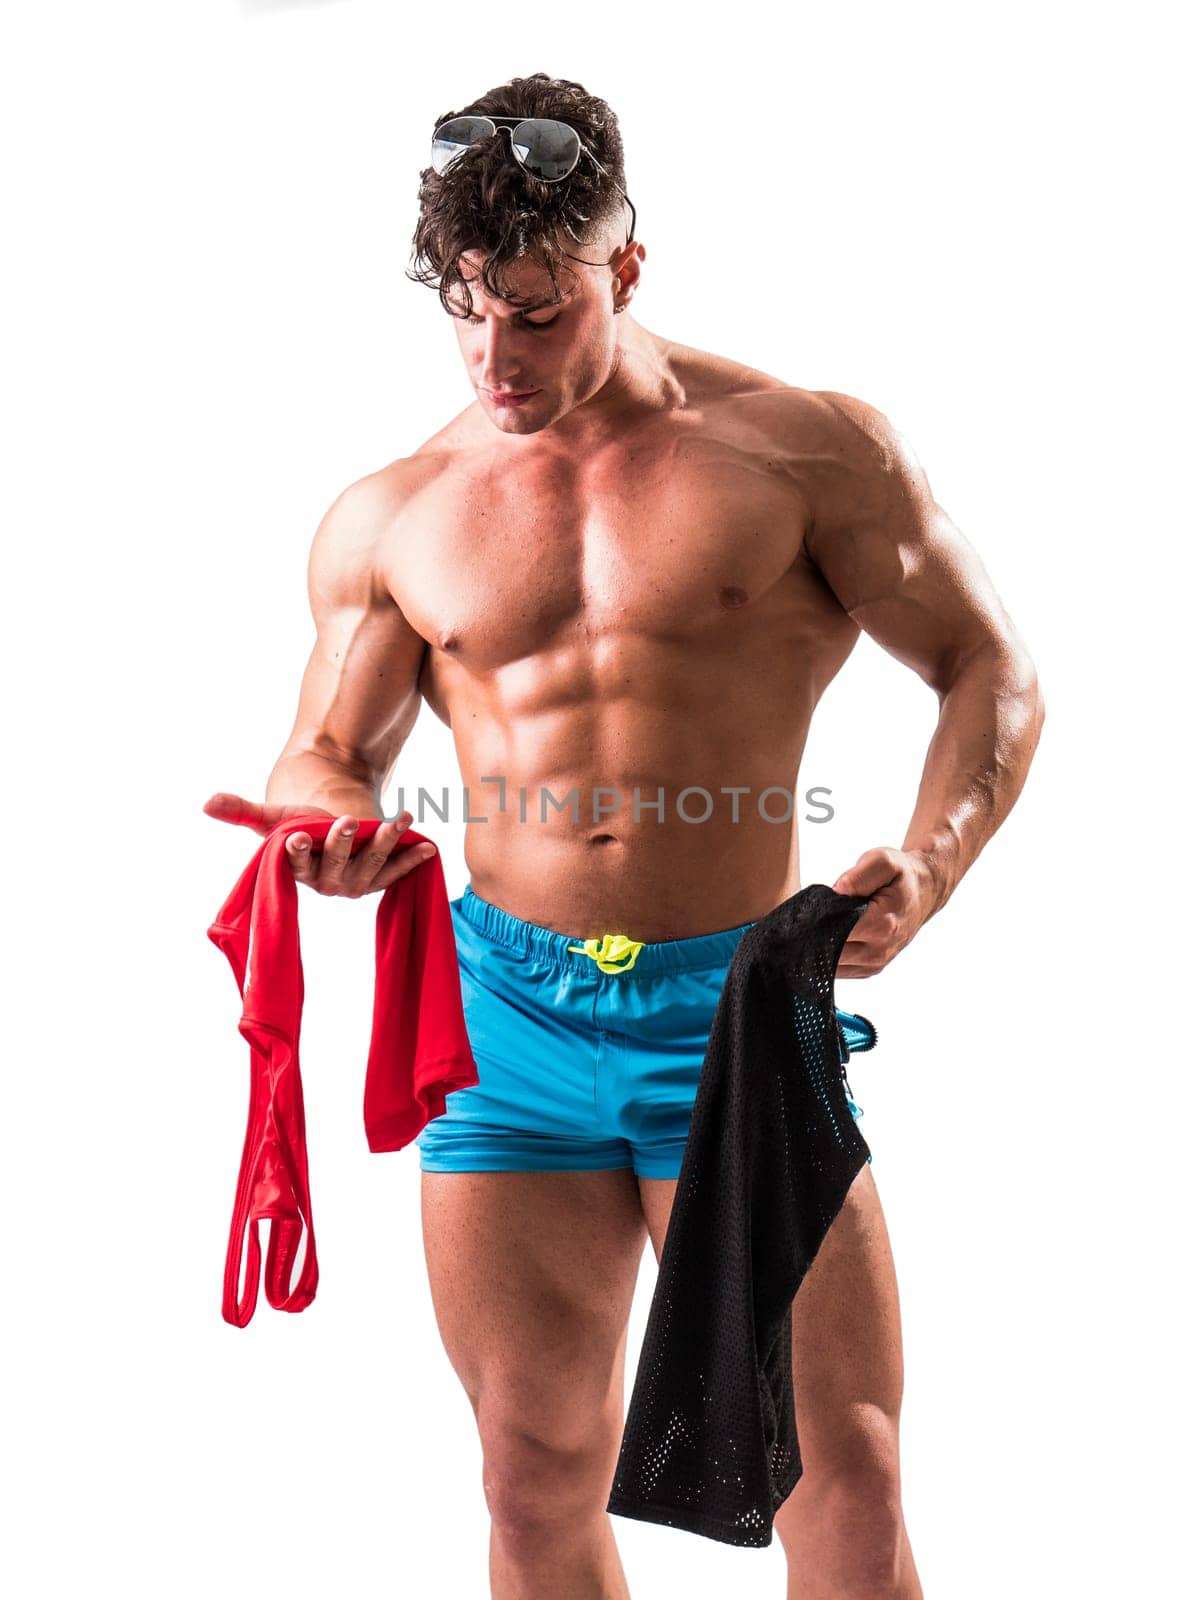 Good Looking Young Gym Fit Man Showing His Sexy Six Pack Abs While Looking at Clothes and Garments. Isolated on White Background in Studio